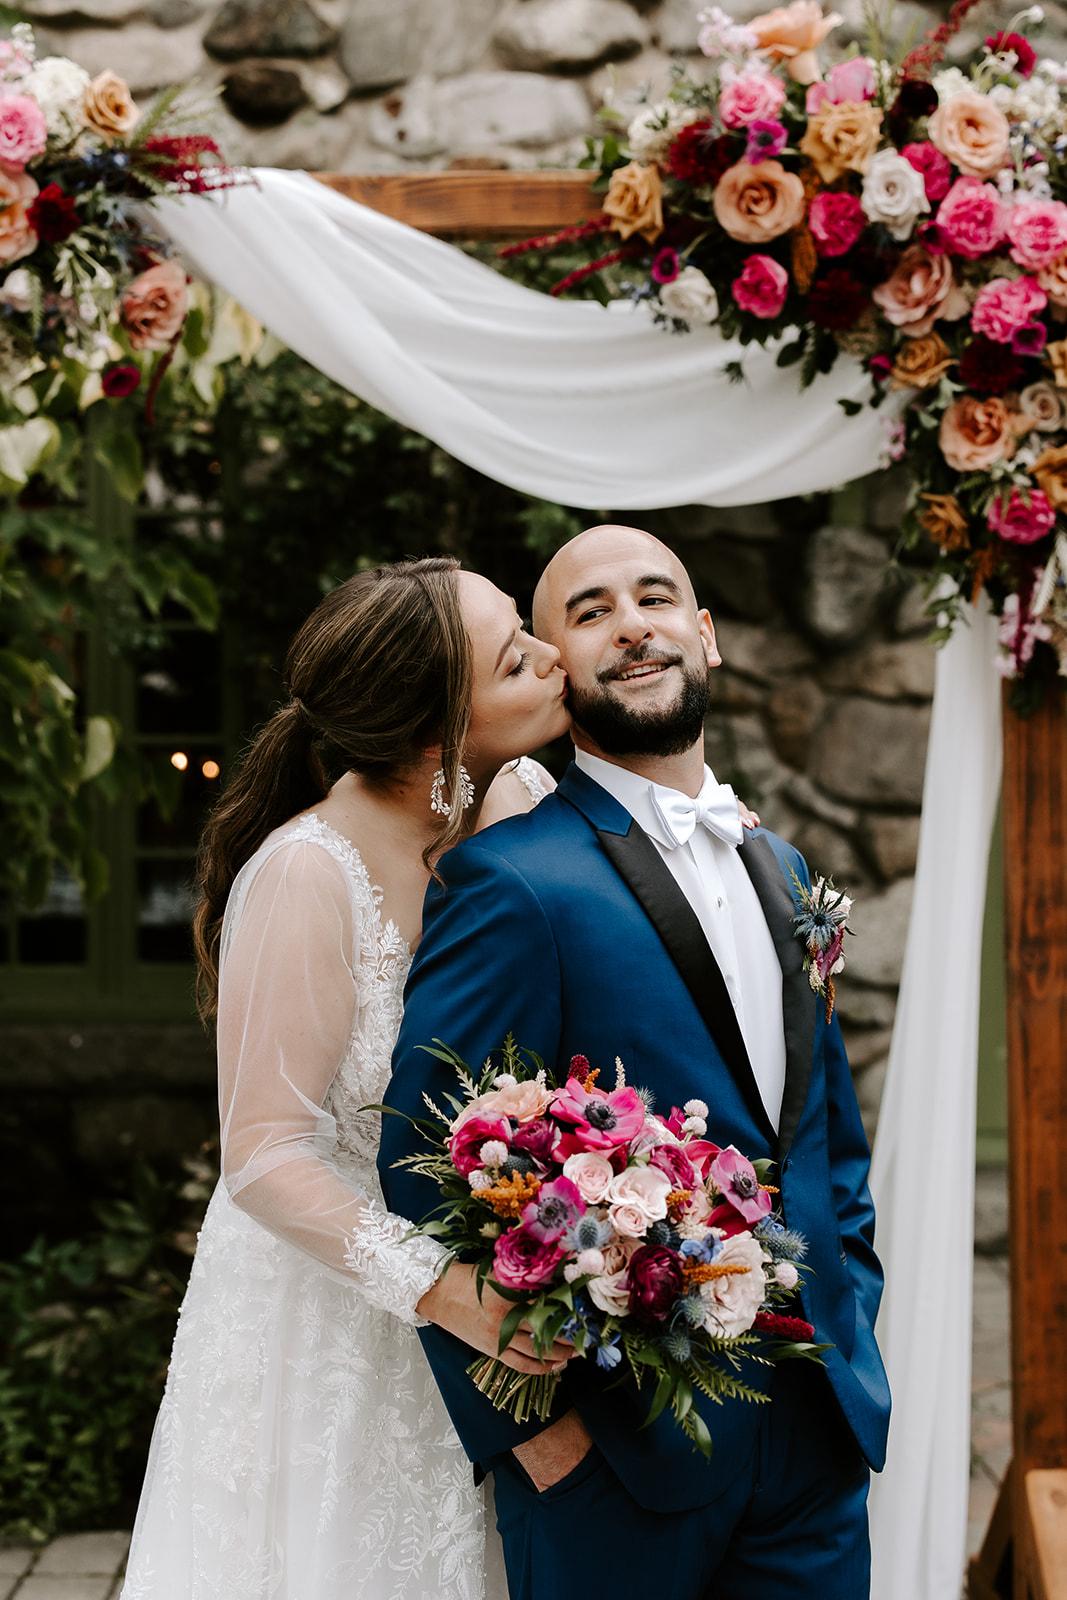 stunning bride and groom pose together under their wedding arch decorated with flavors